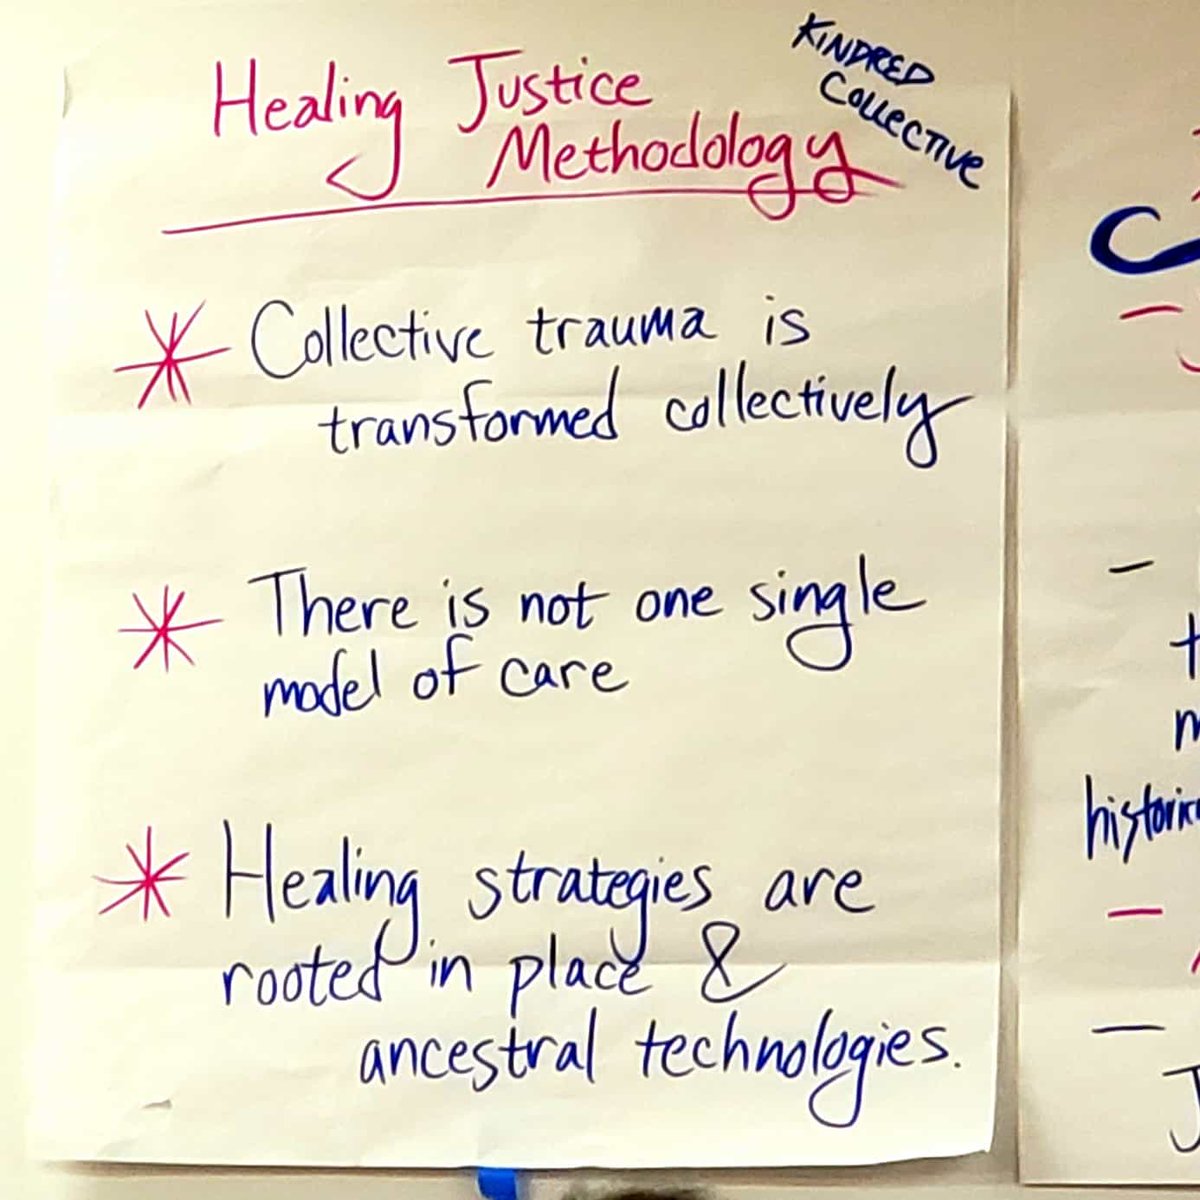 Grateful for today's 'Rooting in Healing Justice' workshop led by Cara Page & Adaku Utah, organized by @prisonculture Rooted in the legacies of Black & Communities of Color, ancestral communal ways of practicing healing & resistance. #healingjustice #community #collectivecare